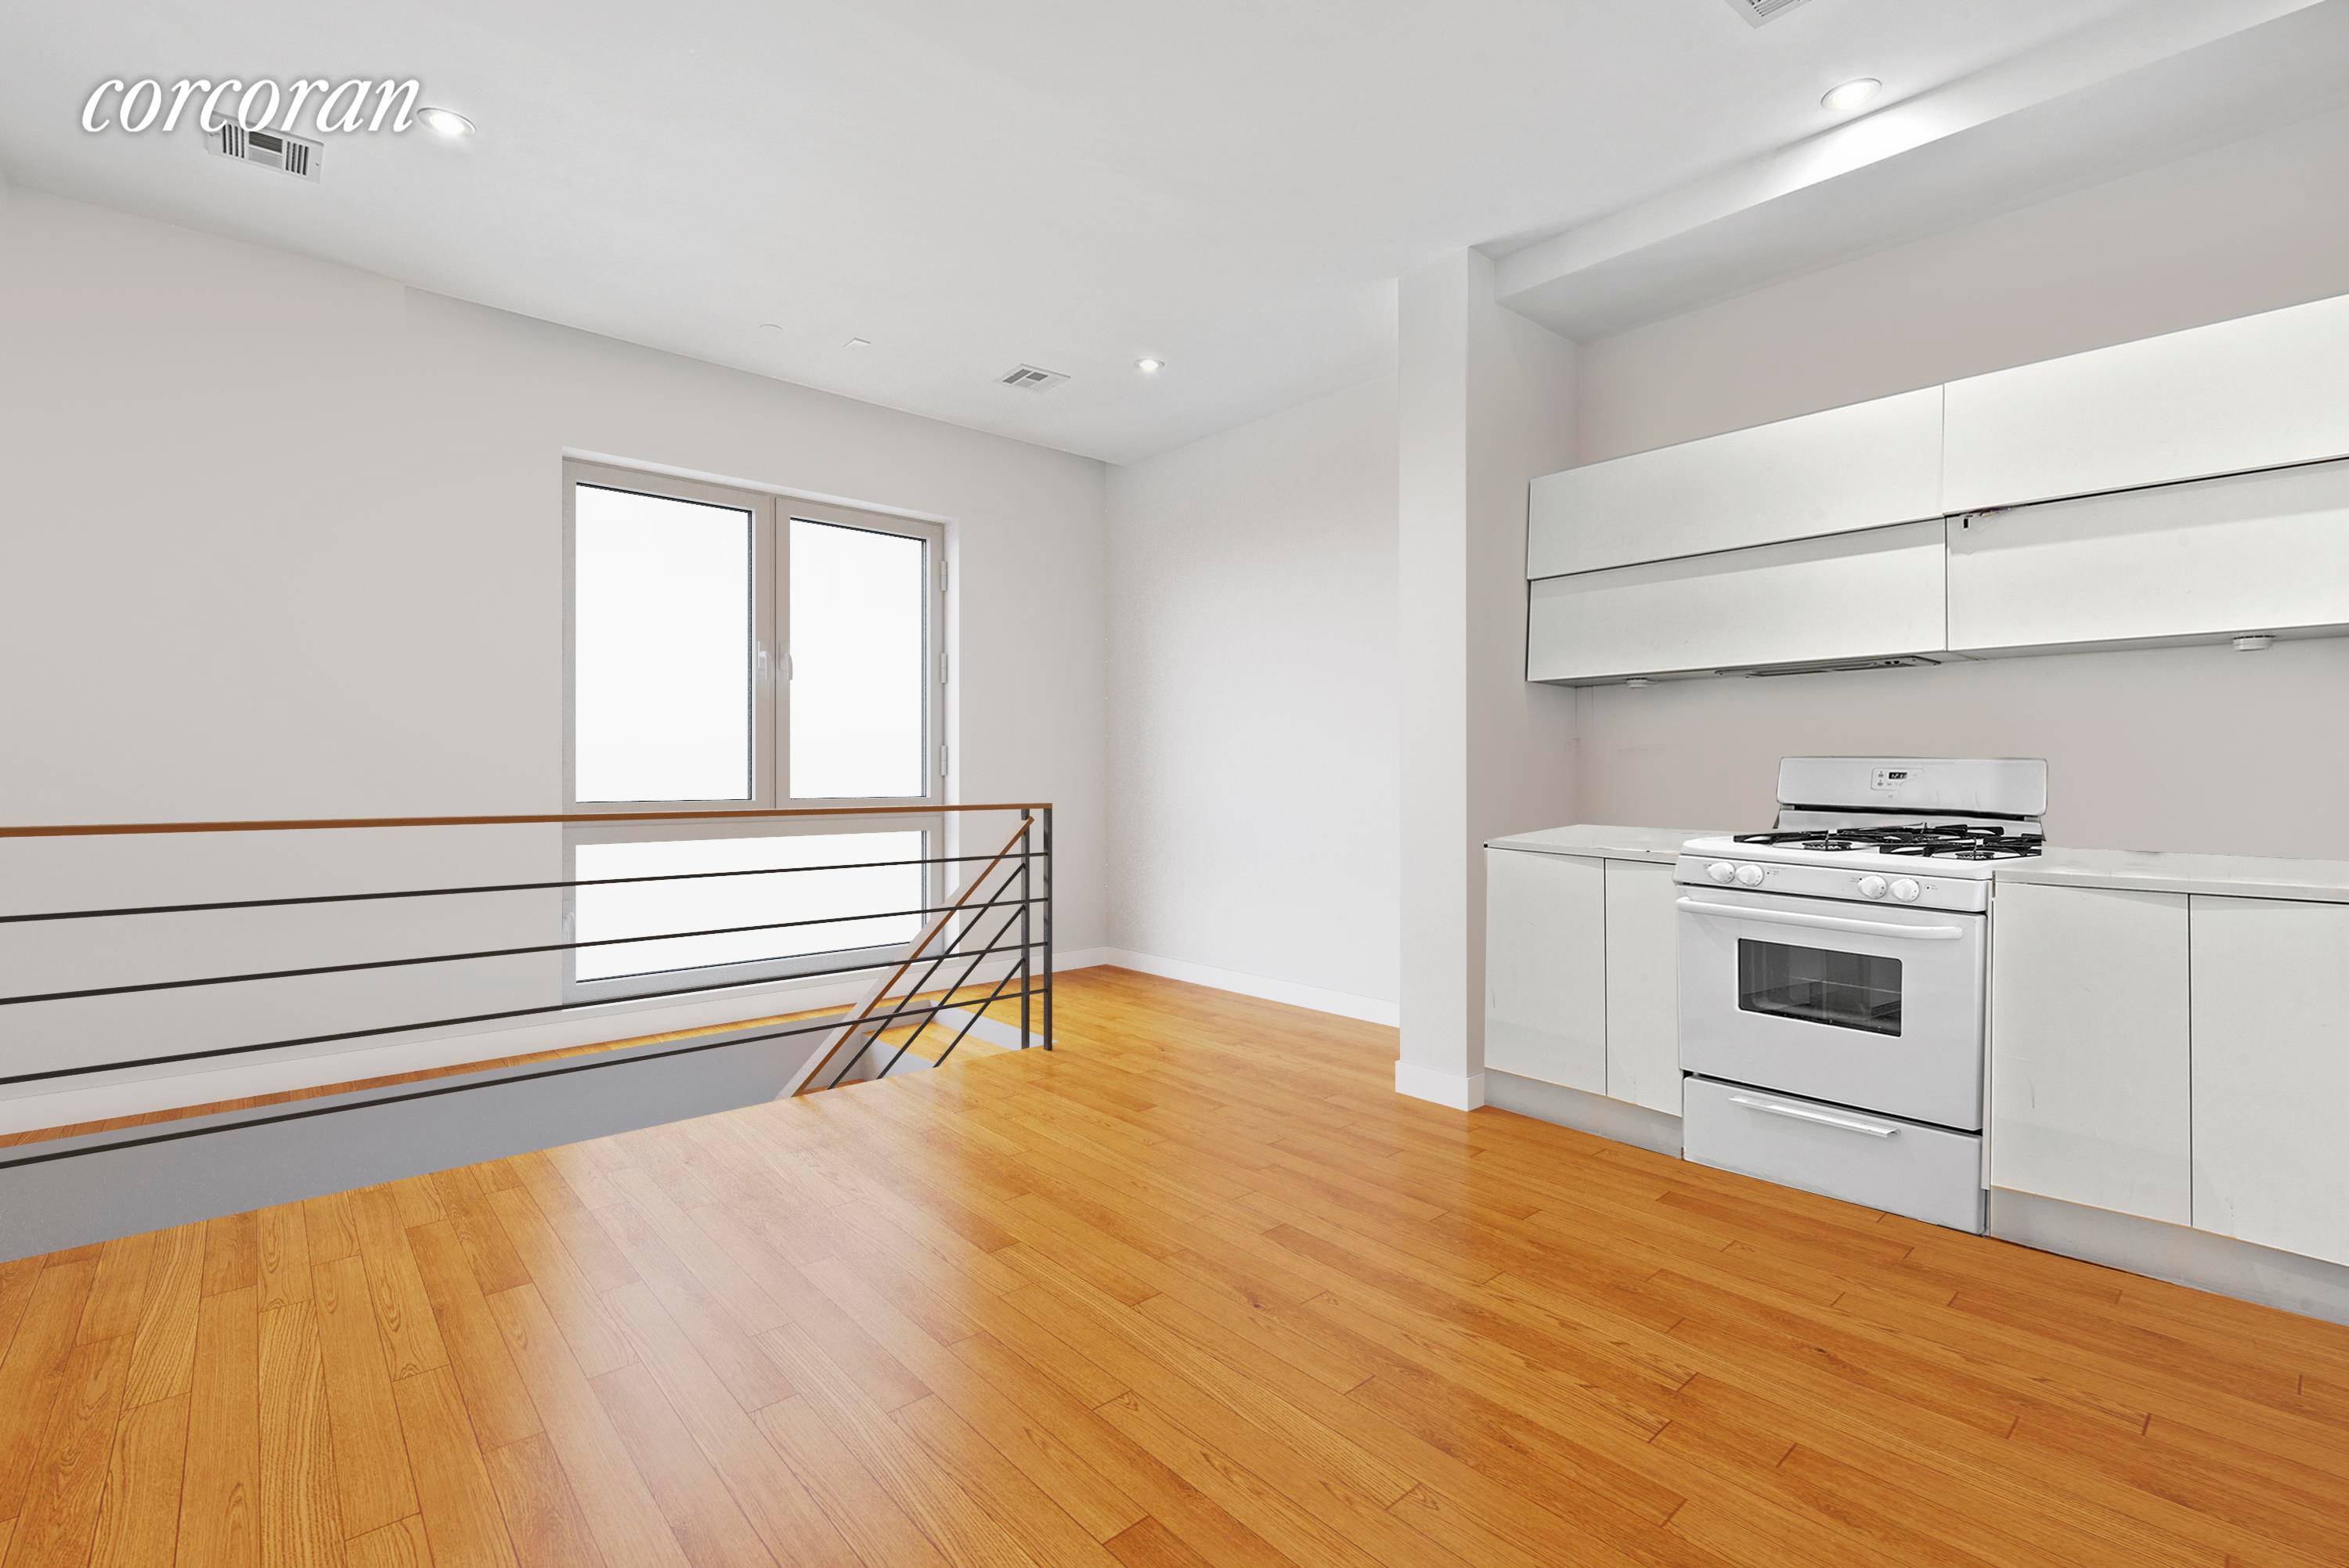 This spacious and modern one bedroom, one and a half bath boutique loft style condo in the vibrant Bushwick neighborhood is looking for its next owners.